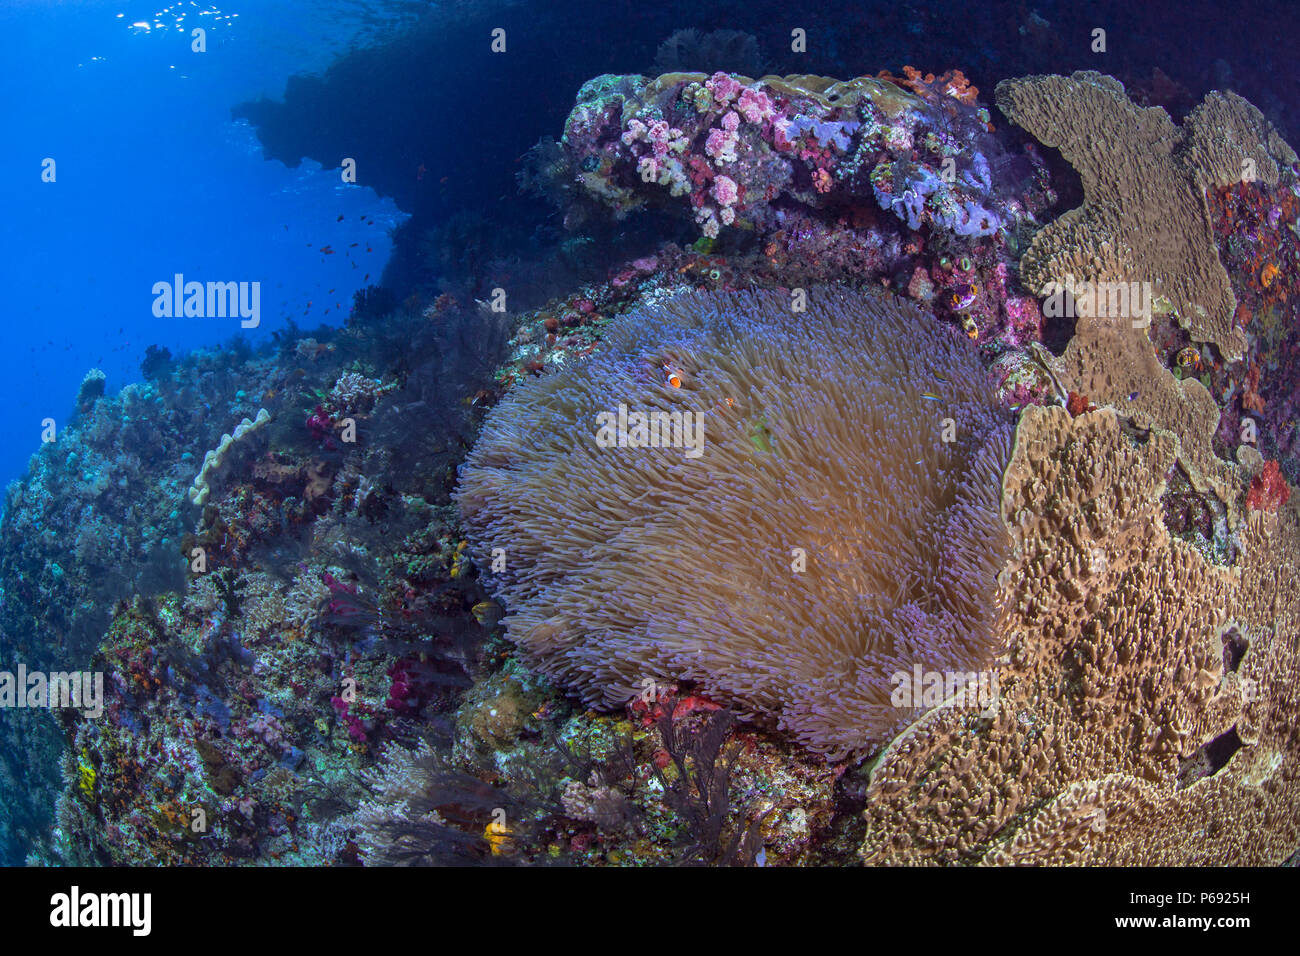 Coral reef with large carpet anemone thrives under cap of a mushroom island. Stock Photo